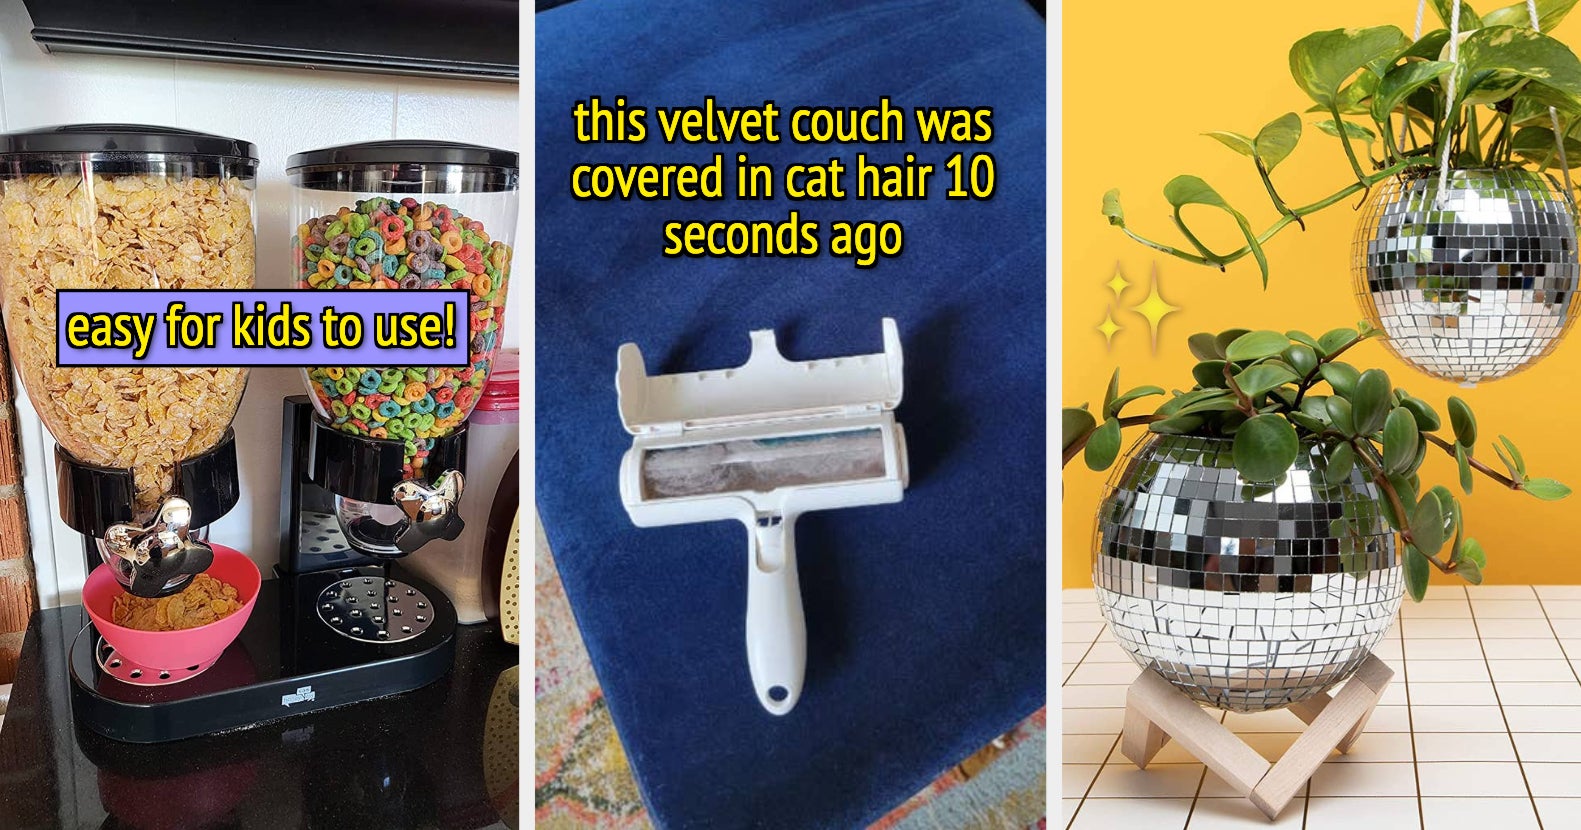 The 20 Viral TikTok Home Products We Love